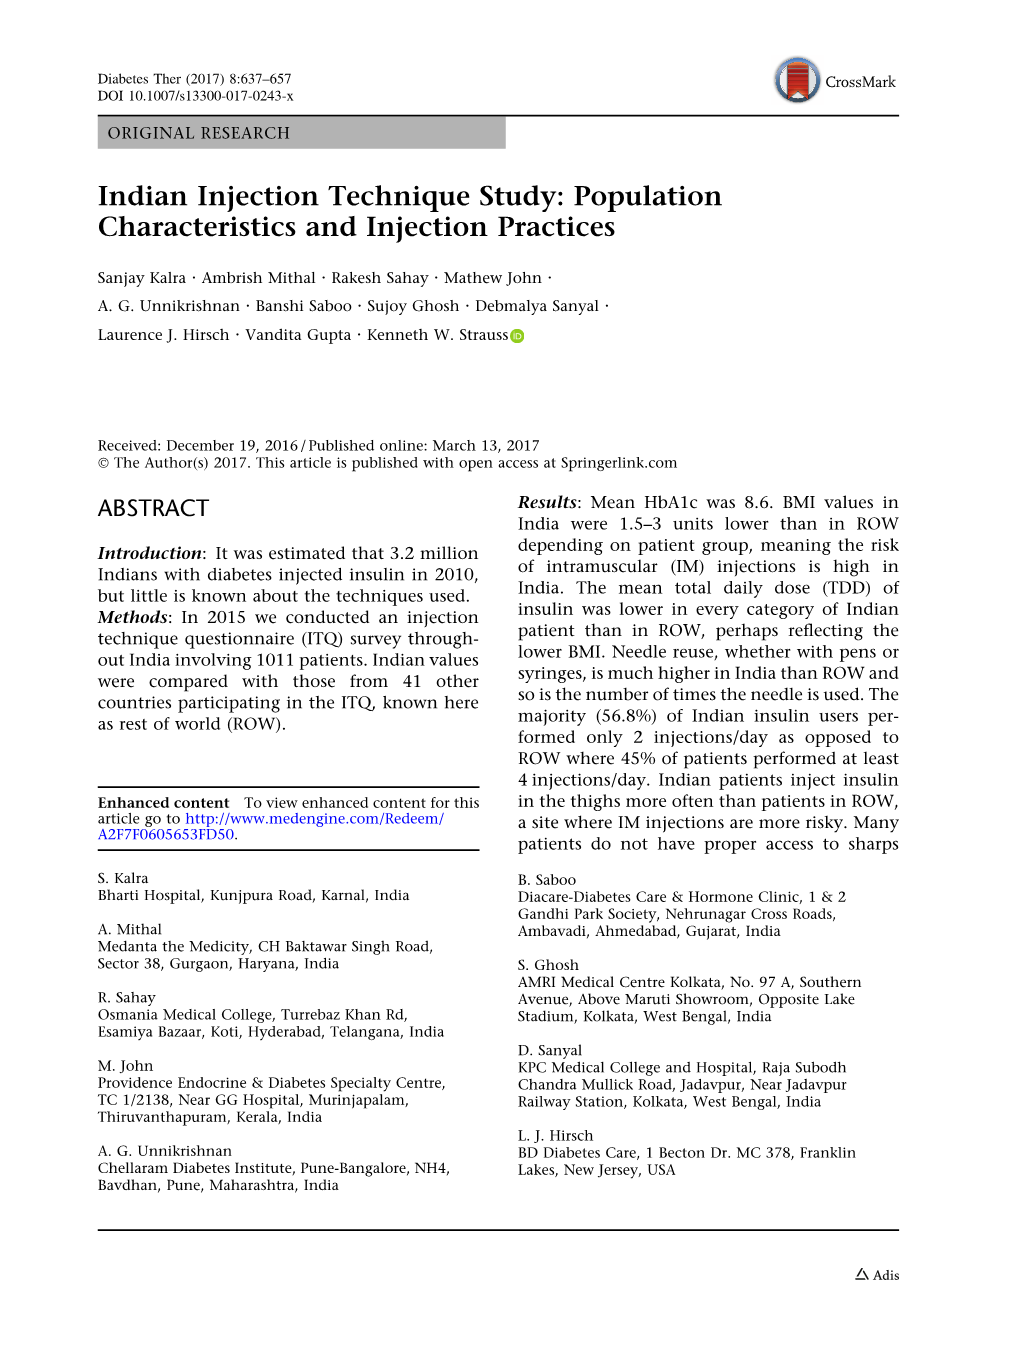 Indian Injection Technique Study: Population Characteristics and Injection Practices